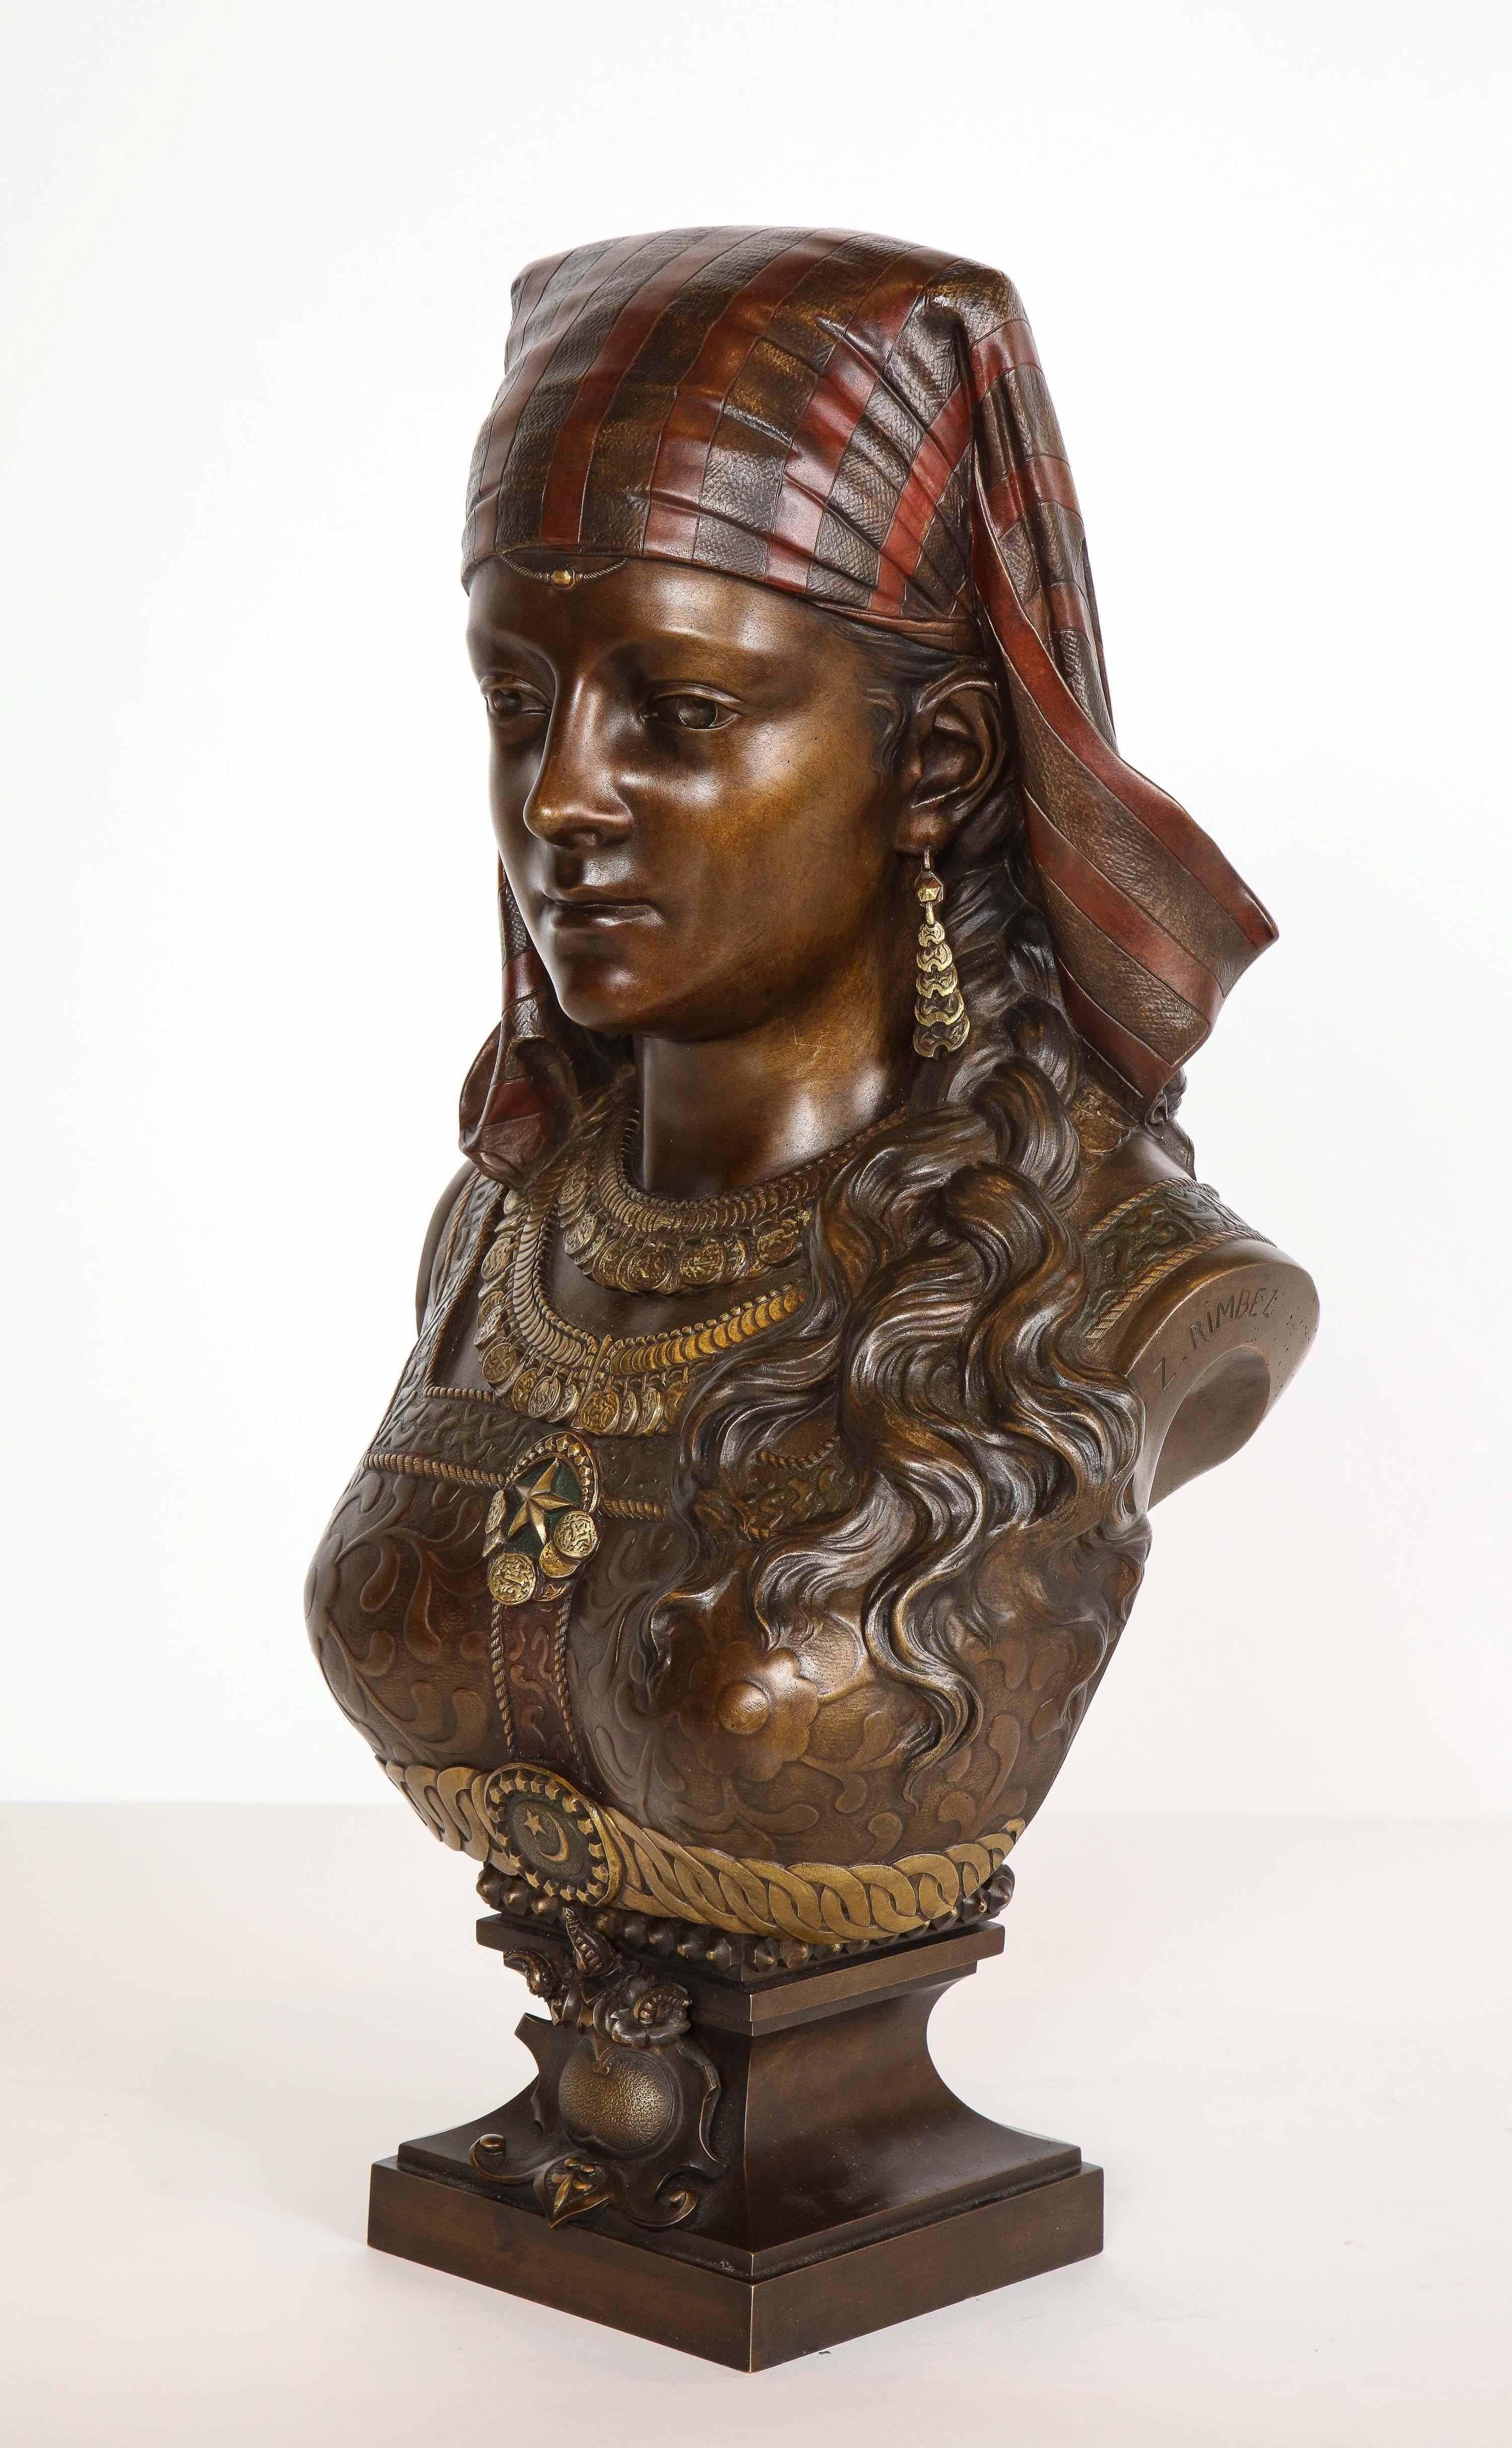 Islamic Exquisite French Multi-Patinated Orientalist Bronze Bust of Saida, by Rimbez